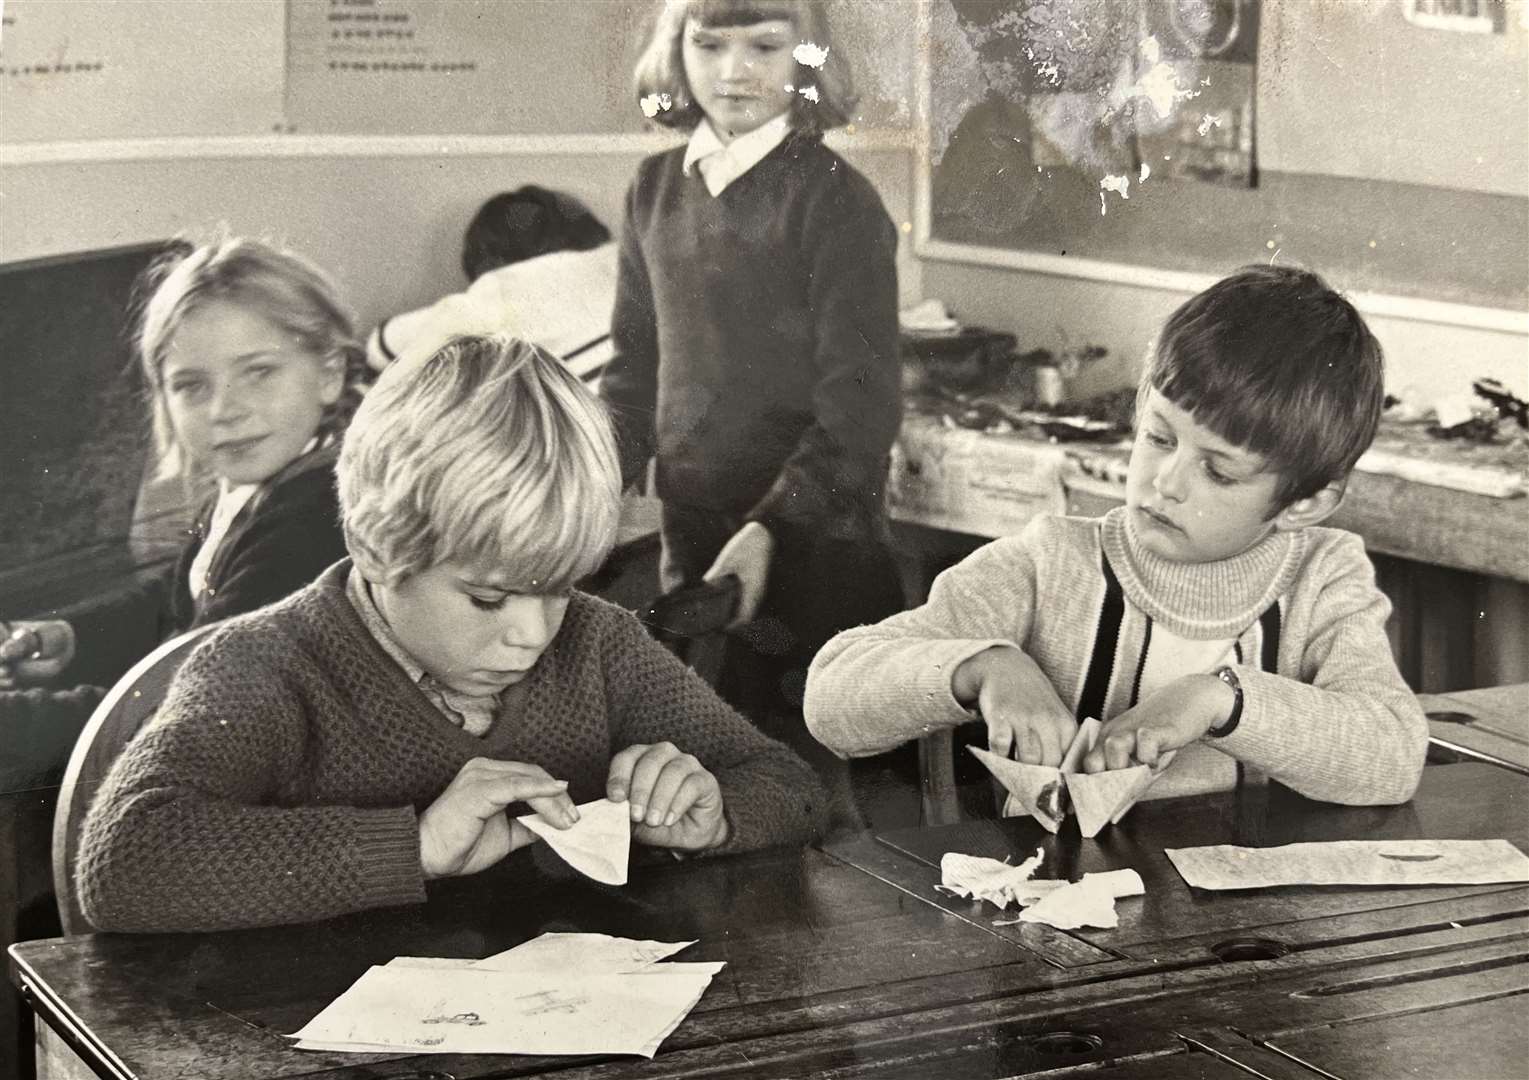 Children at Temple Hill primary school in the 1970s